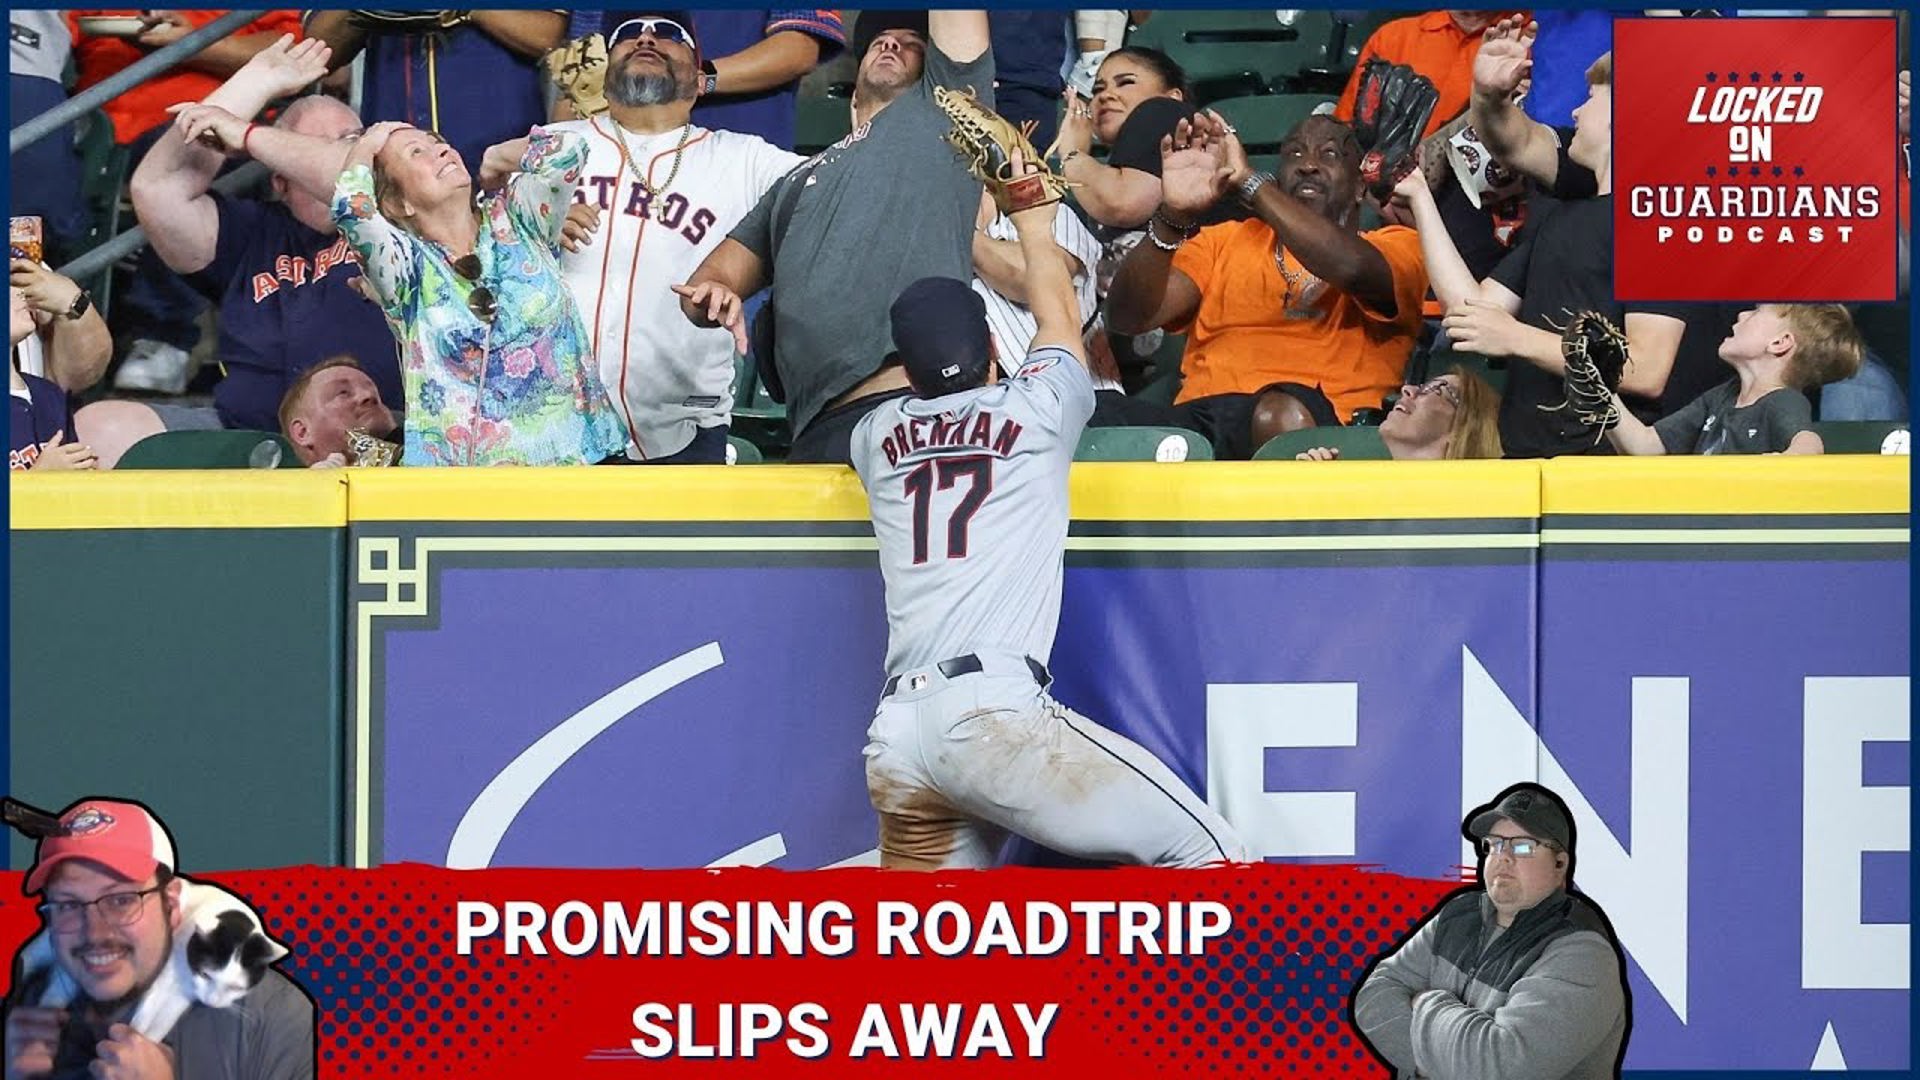 The Guardians had a chance to have a winning road trip, but some extra innings losses and a rough finale in Houston sent them home 2-4 against the Braves and Astros.